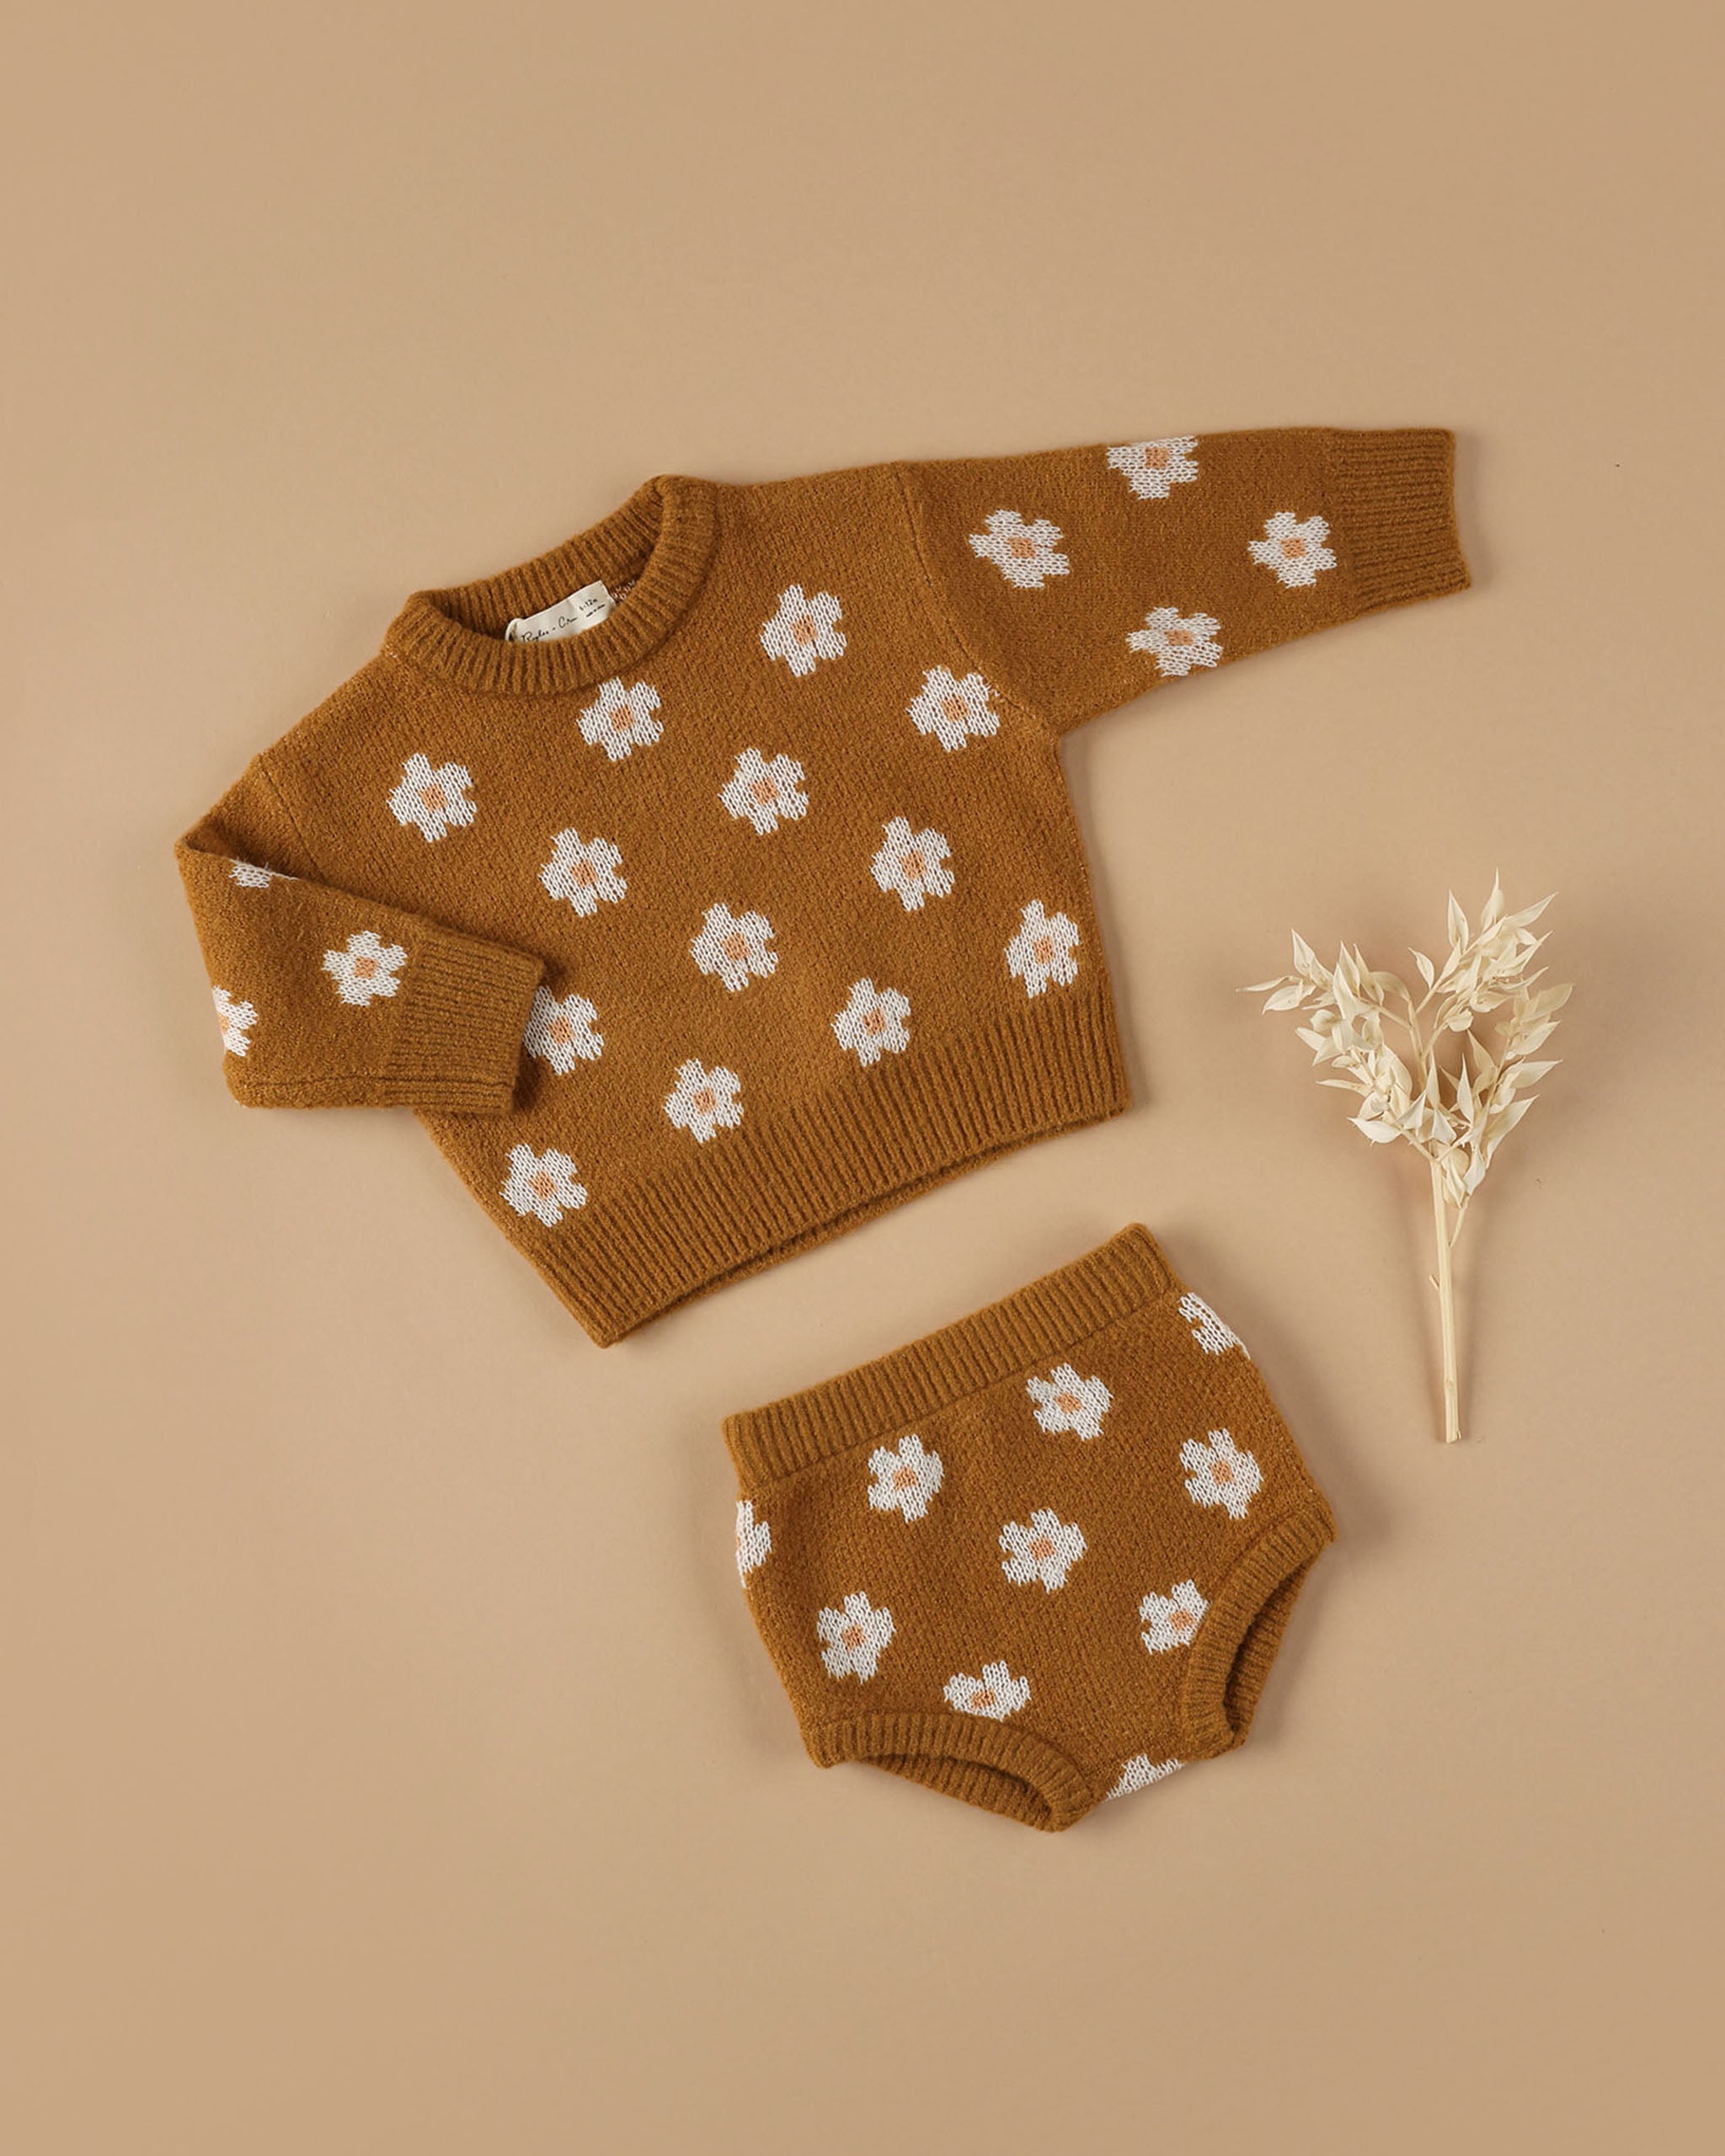 Sweater Bloomer || Daisy Fleur - Rylee + Cru | Kids Clothes | Trendy Baby Clothes | Modern Infant Outfits |